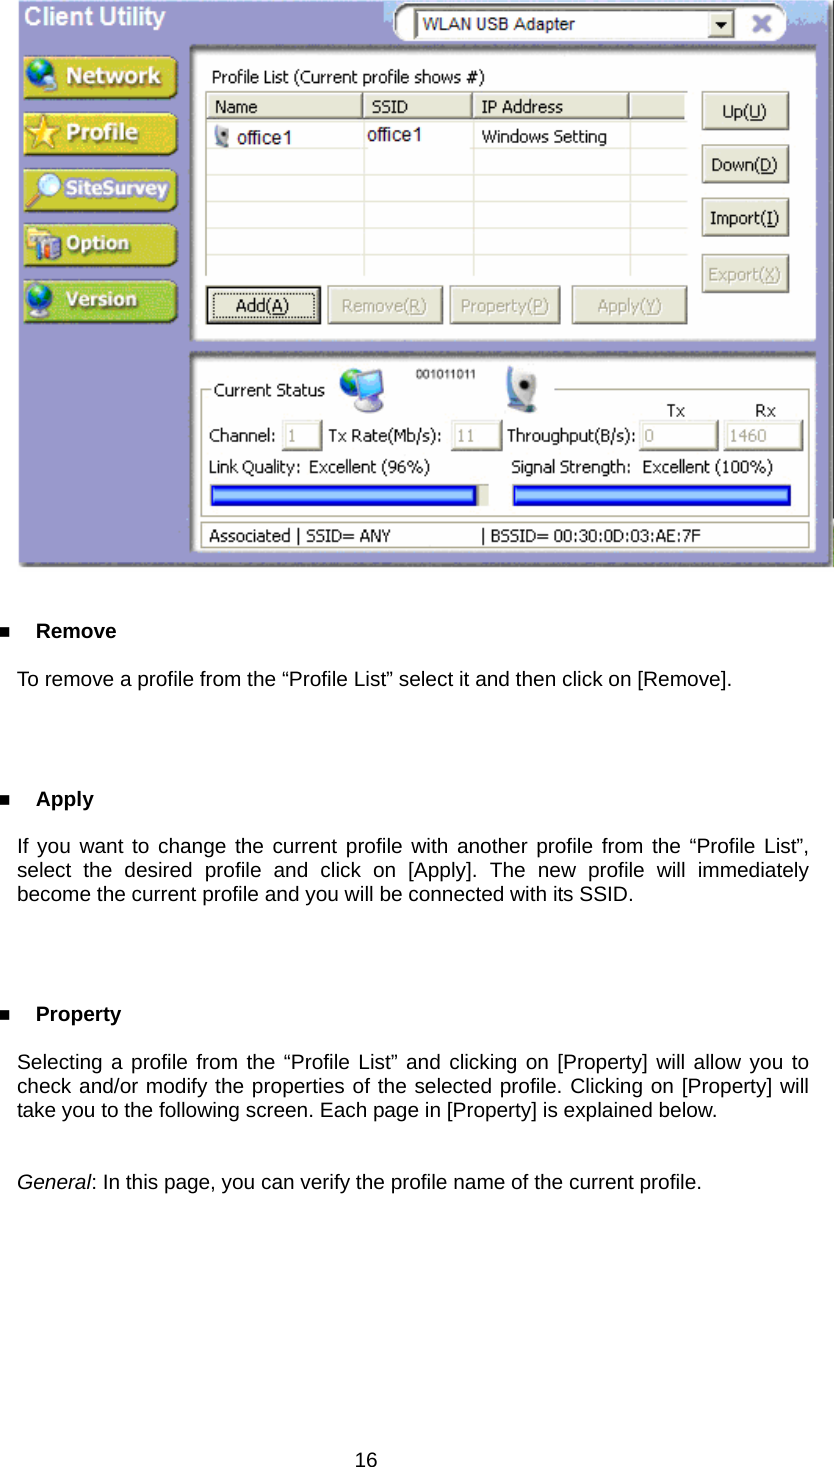     Remove  To remove a profile from the “Profile List” select it and then click on [Remove].      Apply  If you want to change the current profile with another profile from the “Profile List”, select the desired profile and click on [Apply]. The new profile will immediately become the current profile and you will be connected with its SSID.      Property  Selecting a profile from the “Profile List” and clicking on [Property] will allow you to check and/or modify the properties of the selected profile. Clicking on [Property] will take you to the following screen. Each page in [Property] is explained below.   General: In this page, you can verify the profile name of the current profile.  16